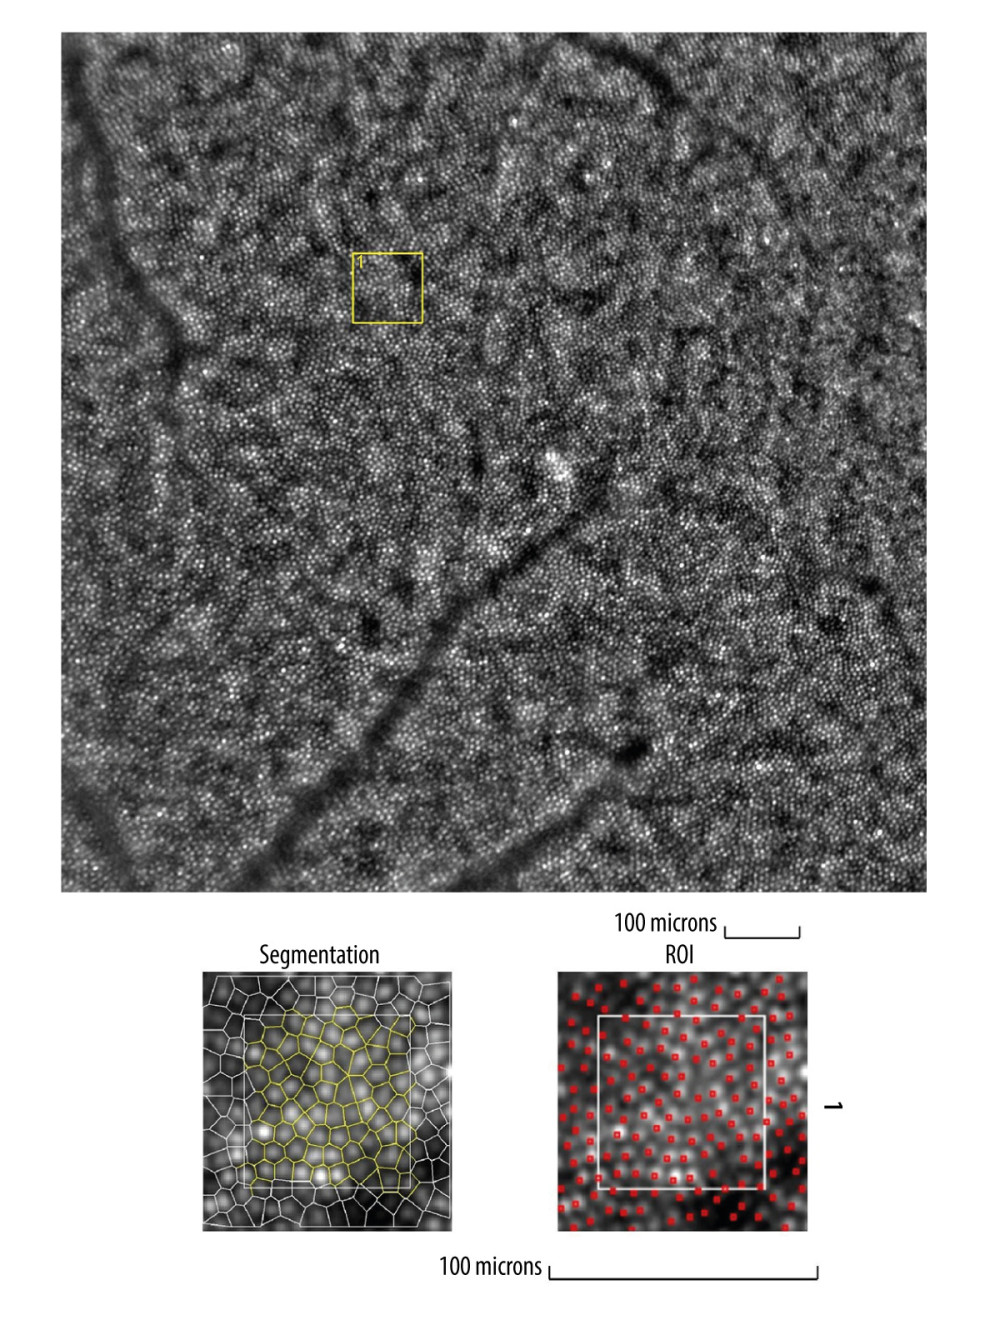 Image of normal cone mosaicImage of normal cone mosaic in a healthy volunteer obtained with adaptive optics camera 4°×4° degree square (Rtx-1, Imagine Eyes, Orsay, France). The analysis was performed at superior 2° from the fovea (top). The region of interest (ROI) (yellow square in the top image) was used for automated cone segmentation (bottom left) and detection (bottom right) using dedicated software. Red squares correspond to automatically identified cones (bottom right). The image is from the author’s collection.